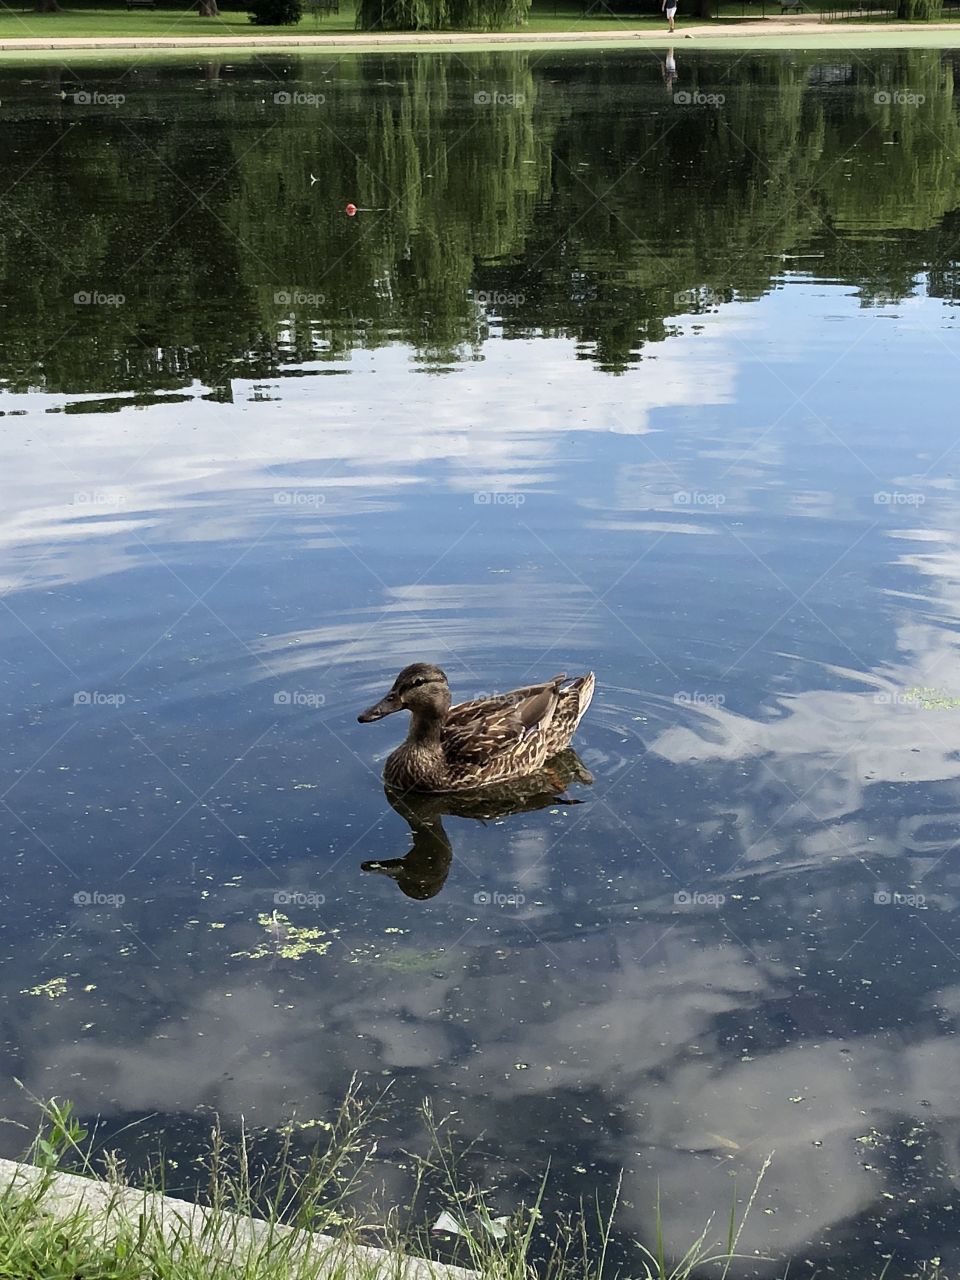 A duck swimming in a pool of water somewhere in the National Mall in Washington DC 